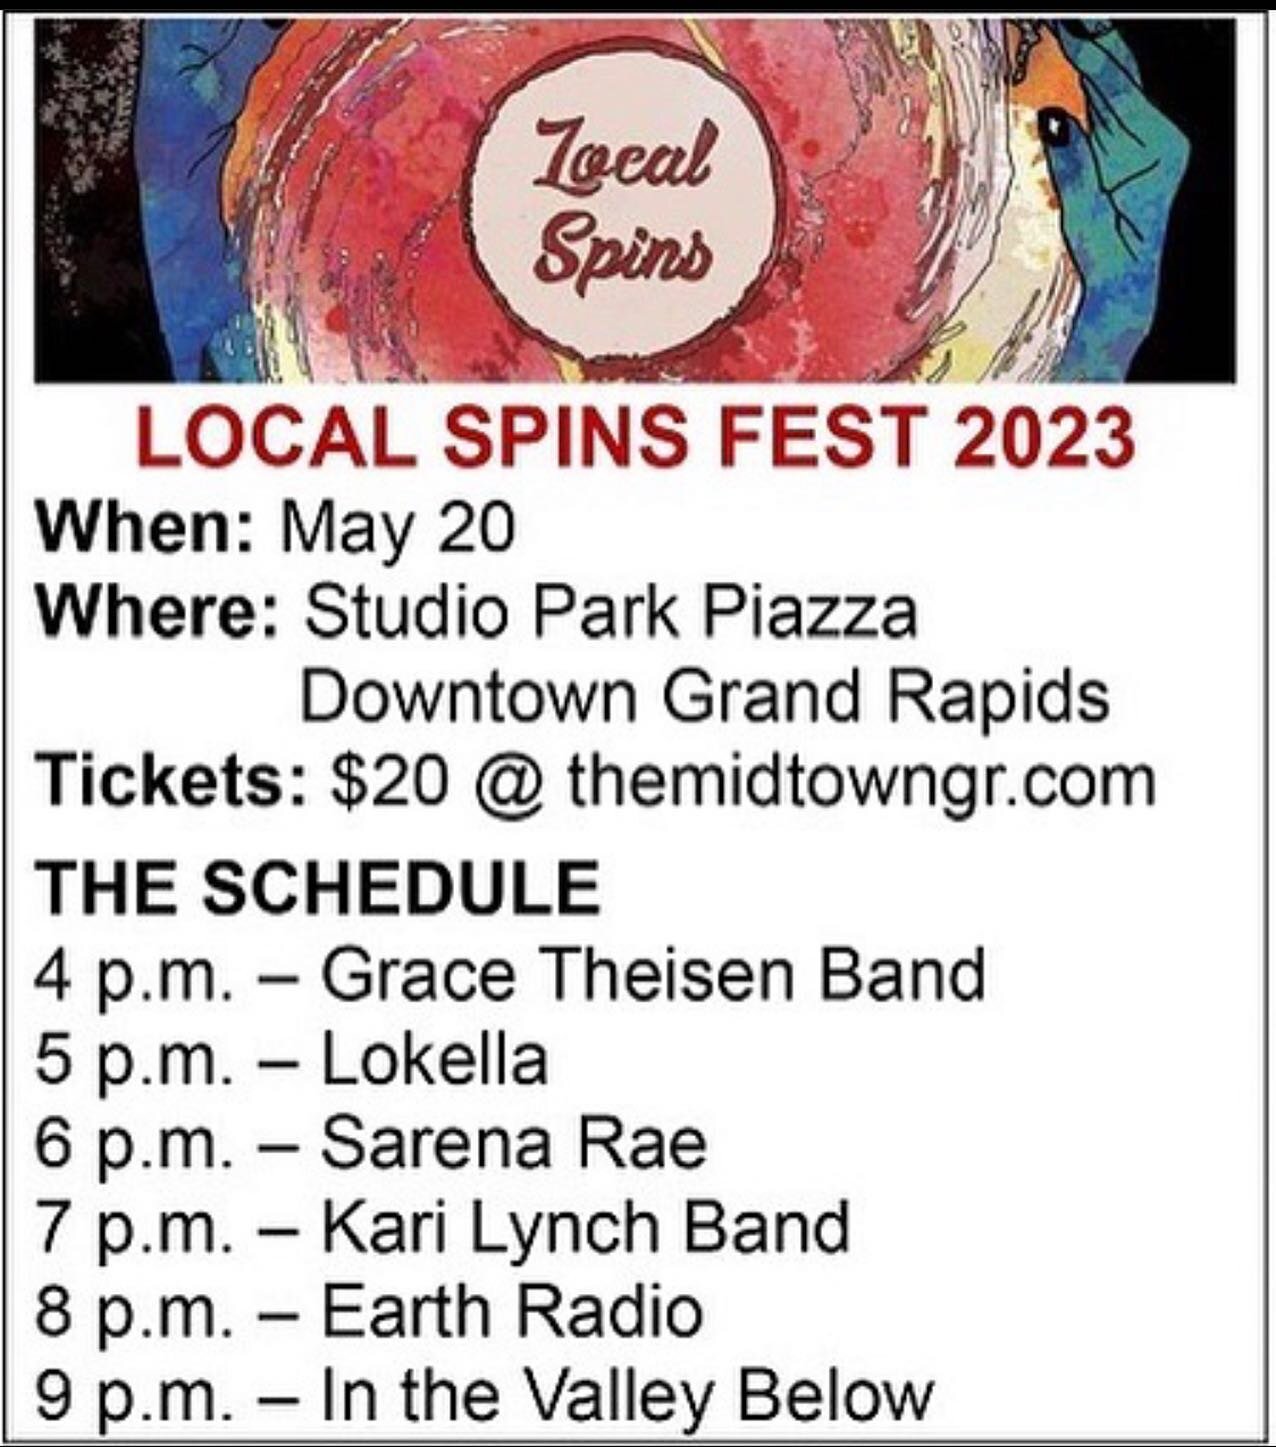 TODAY! The weather&rsquo;s looking great for Local Spins Fest! 🤩

We had a great time yesterday at @liverybrew (with some solid new sound upgrades!) and we&rsquo;re riding that energy into our set tonight, so come say hi and groove with us!

Also, c